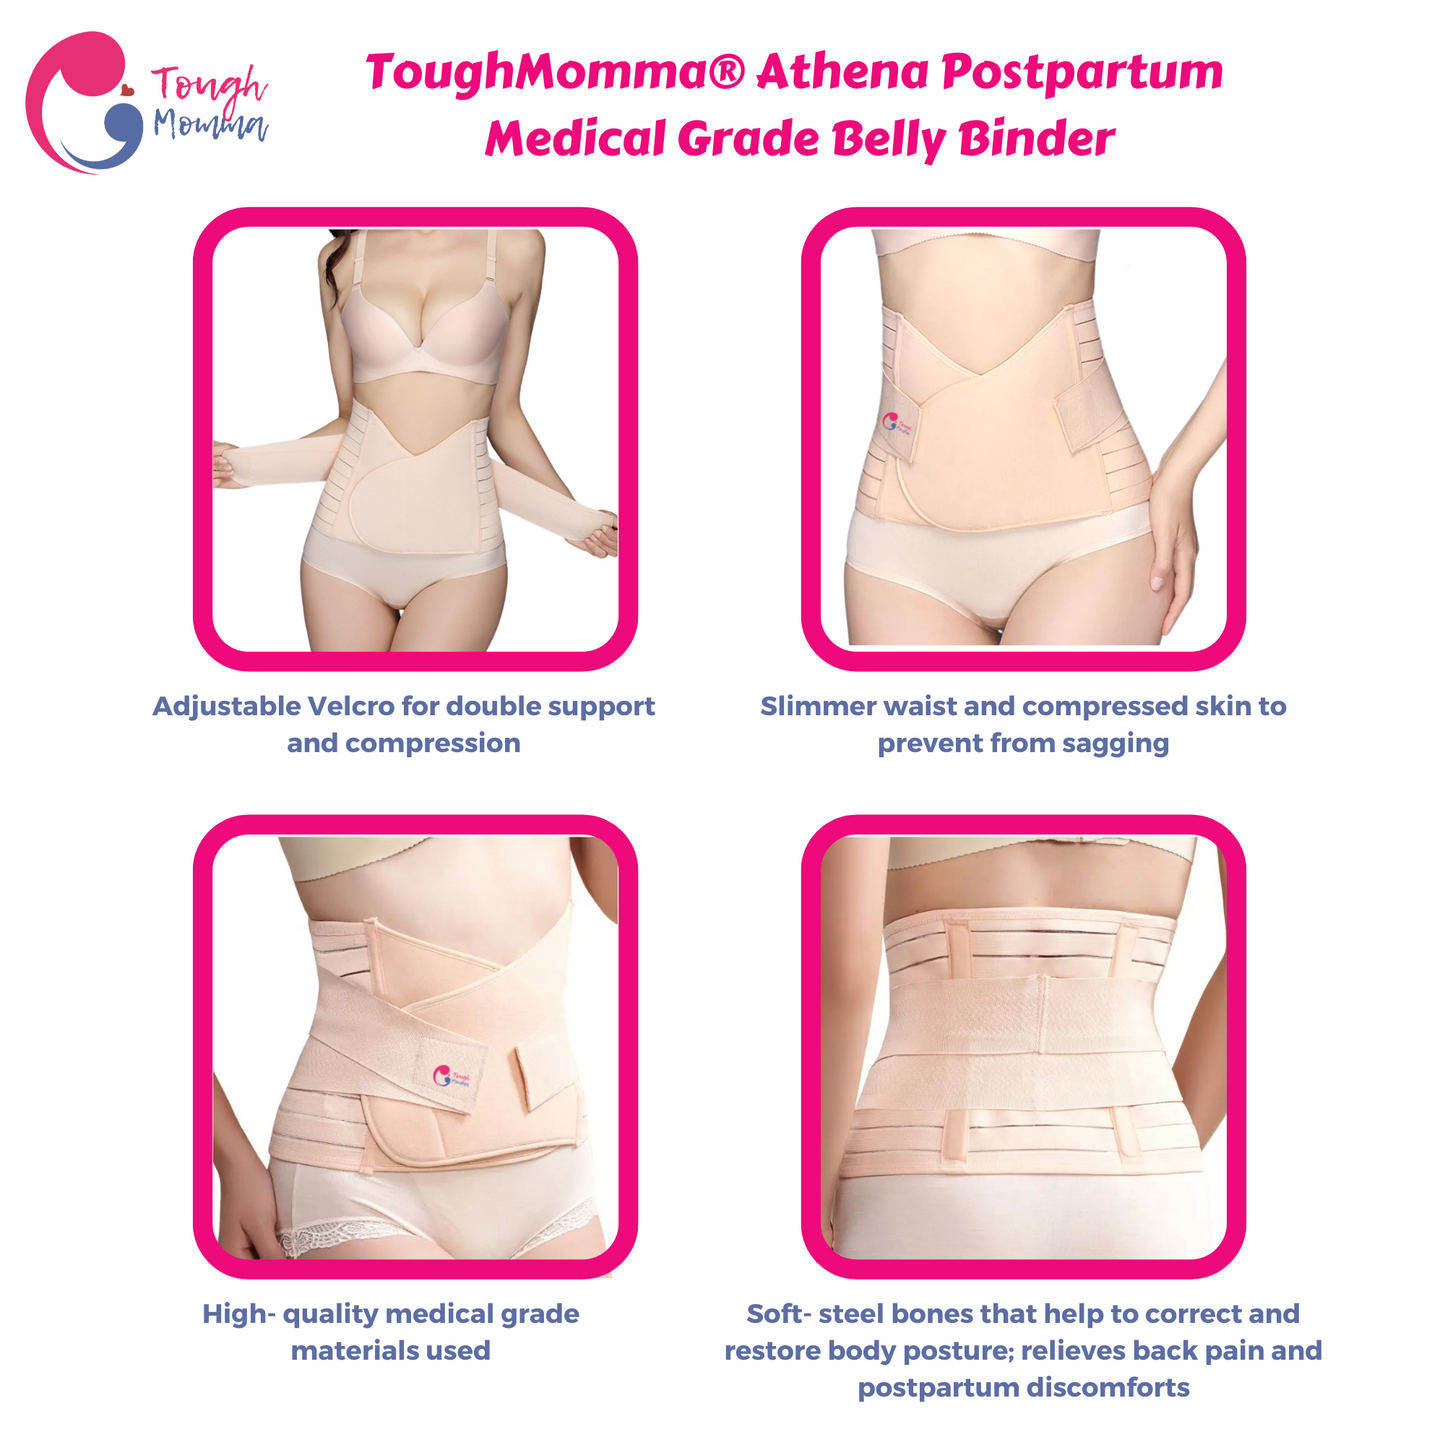 SLIGHTLY DAMAGED/STAINED ToughMomma Athena Postpartum Medical Grade Recovery Belly Binder